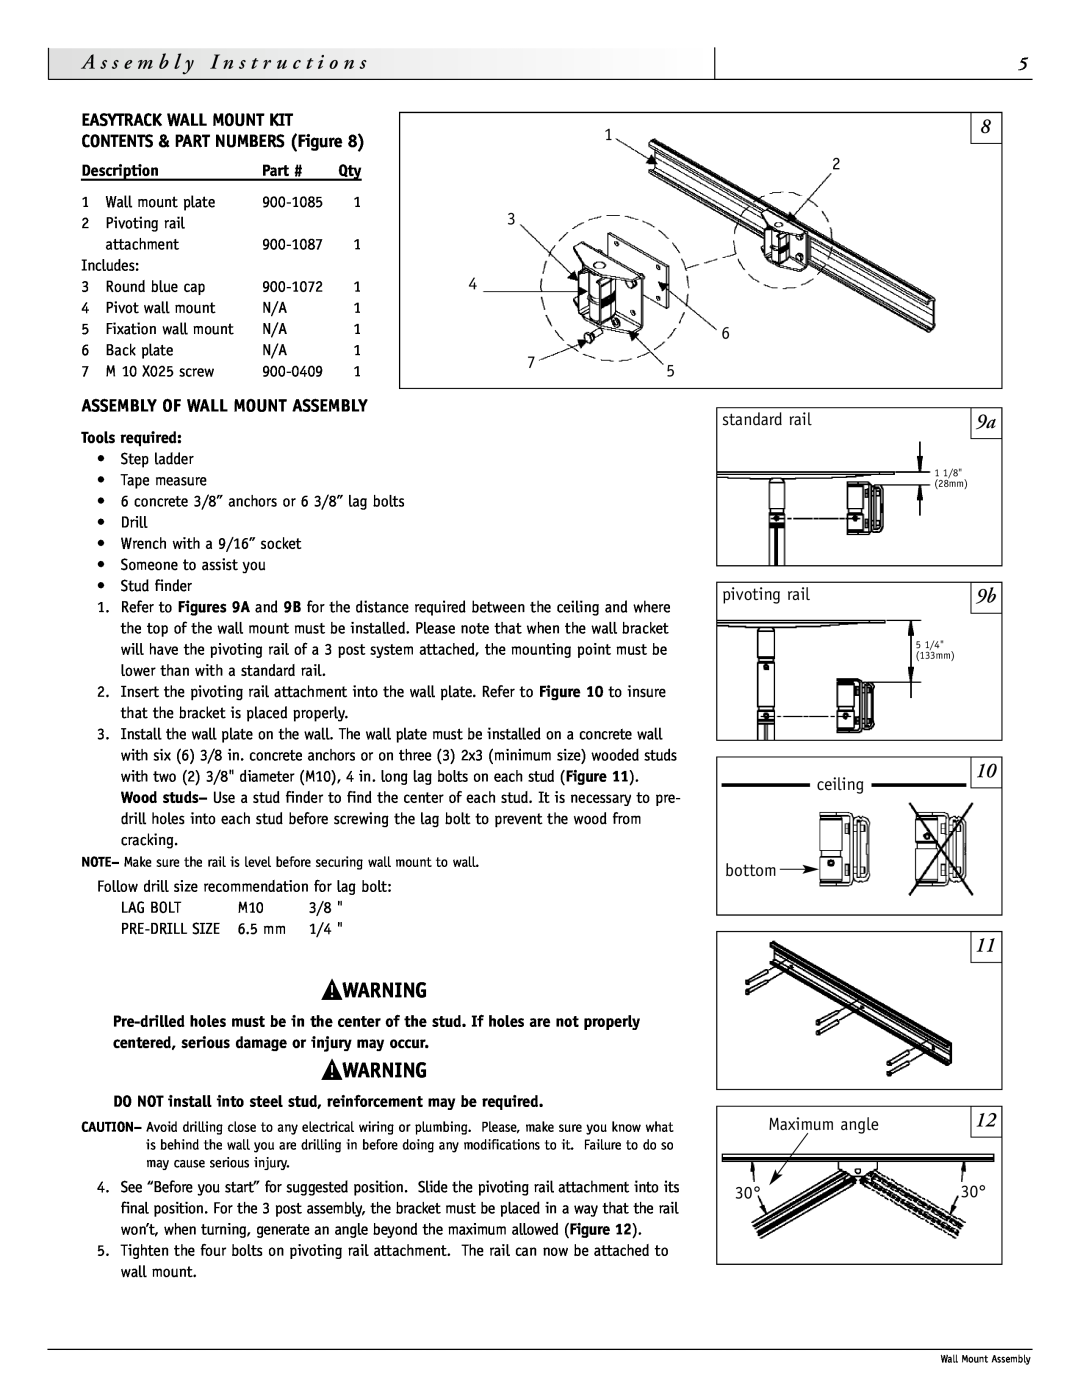 Sunrise Medical 900-1086 Assembly Of Wall Mount Assembly, standard rail, pivoting rail, ceiling bottom, Description 